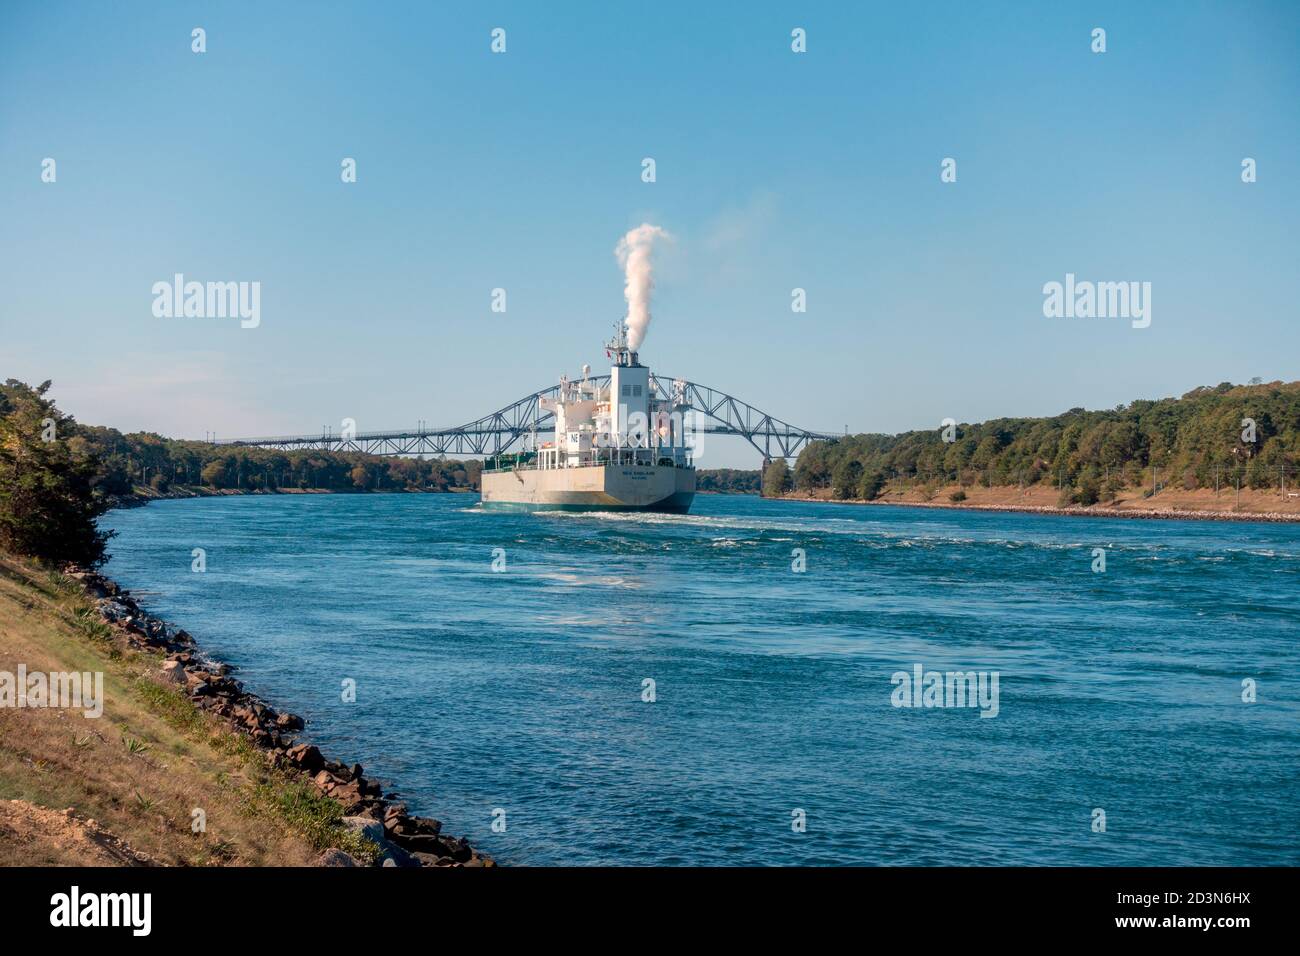 Irving Oil Company tanker ship New England in the Cape Cod Canal Stock Photo